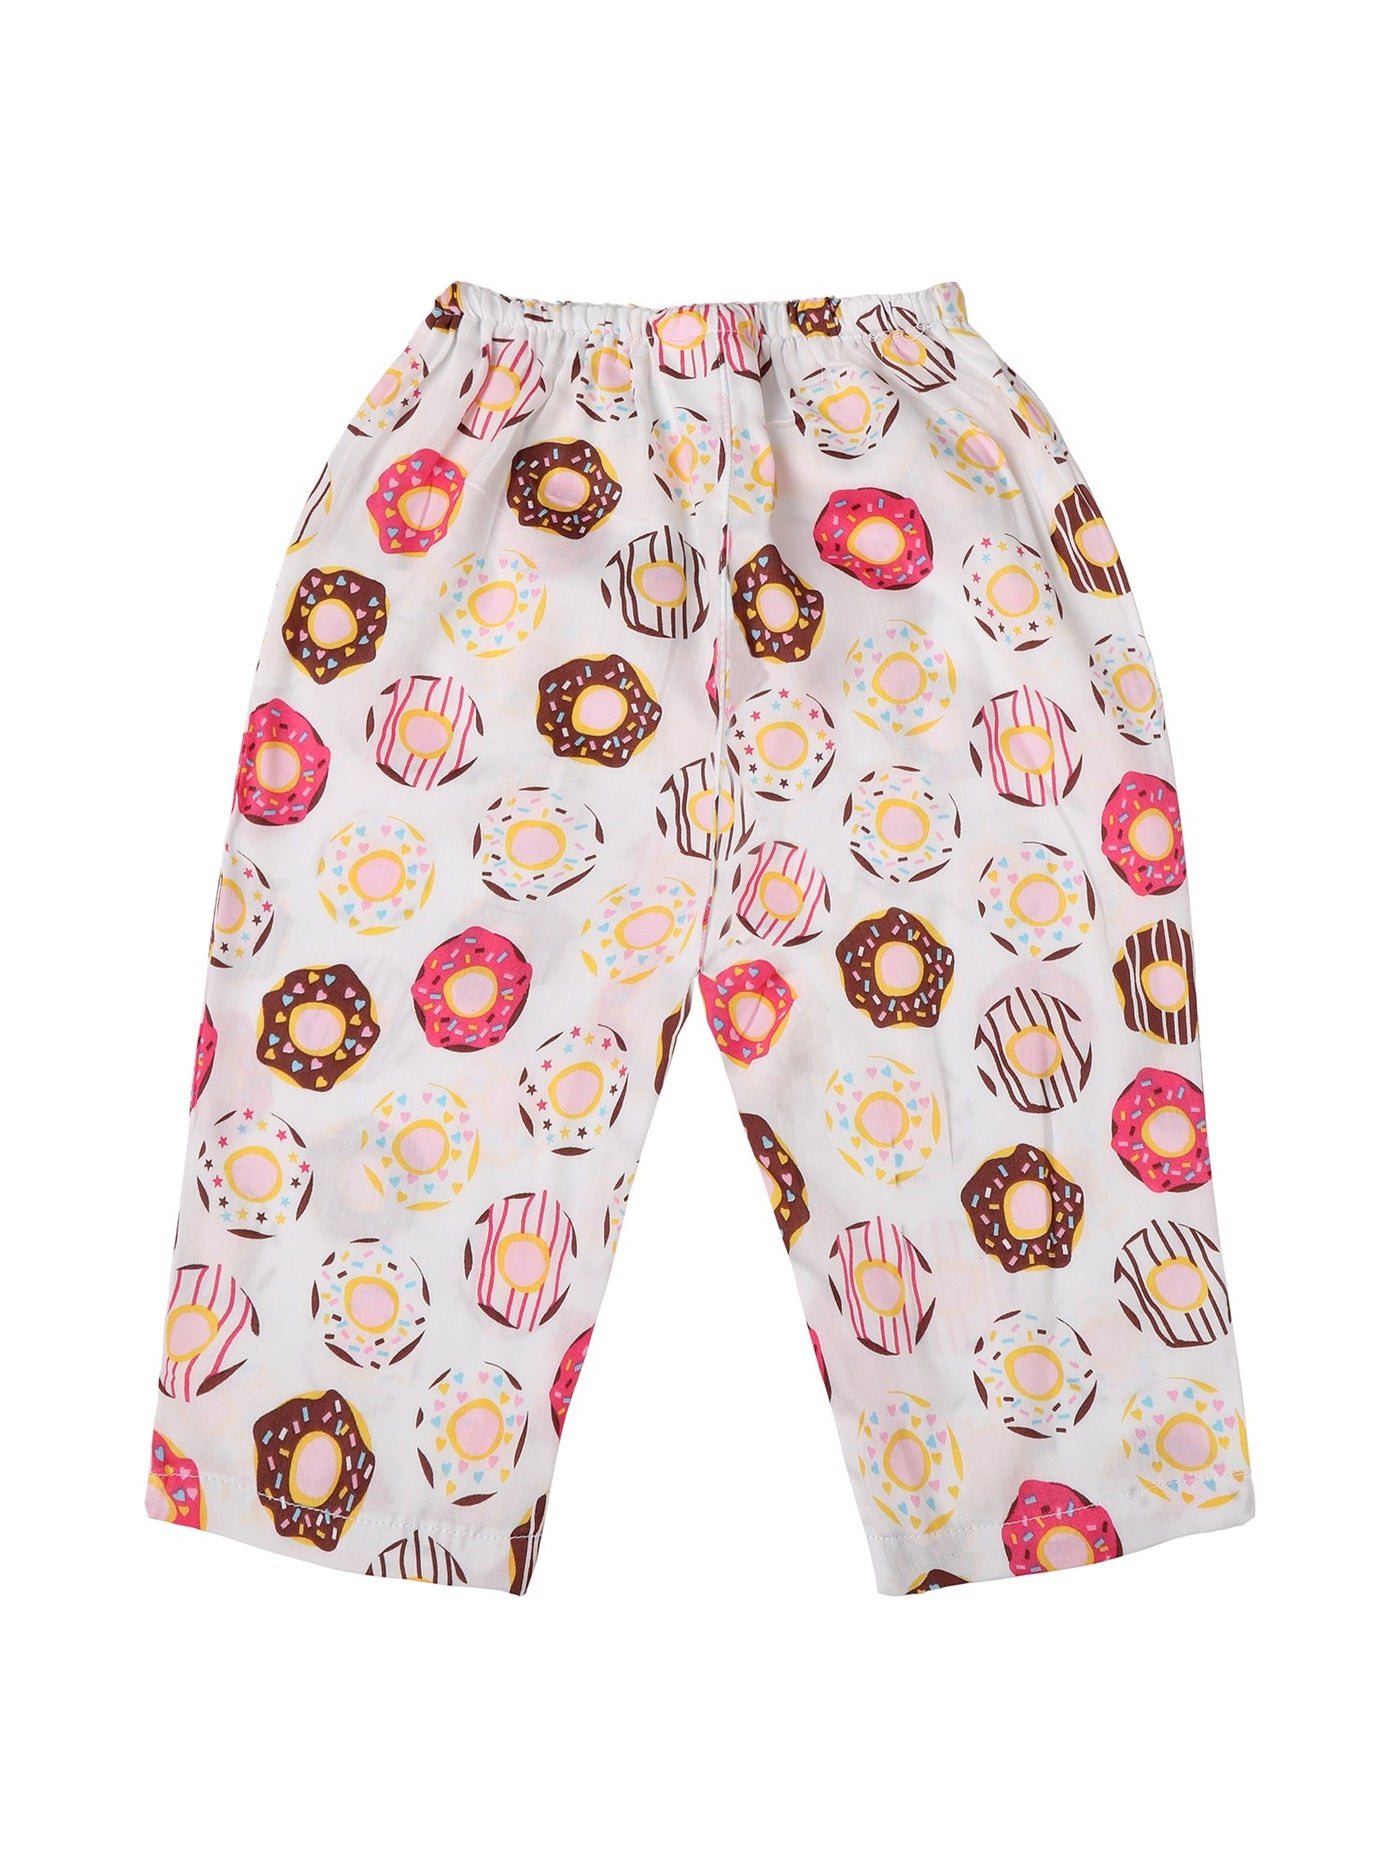 Donuts Infant Nightsuit